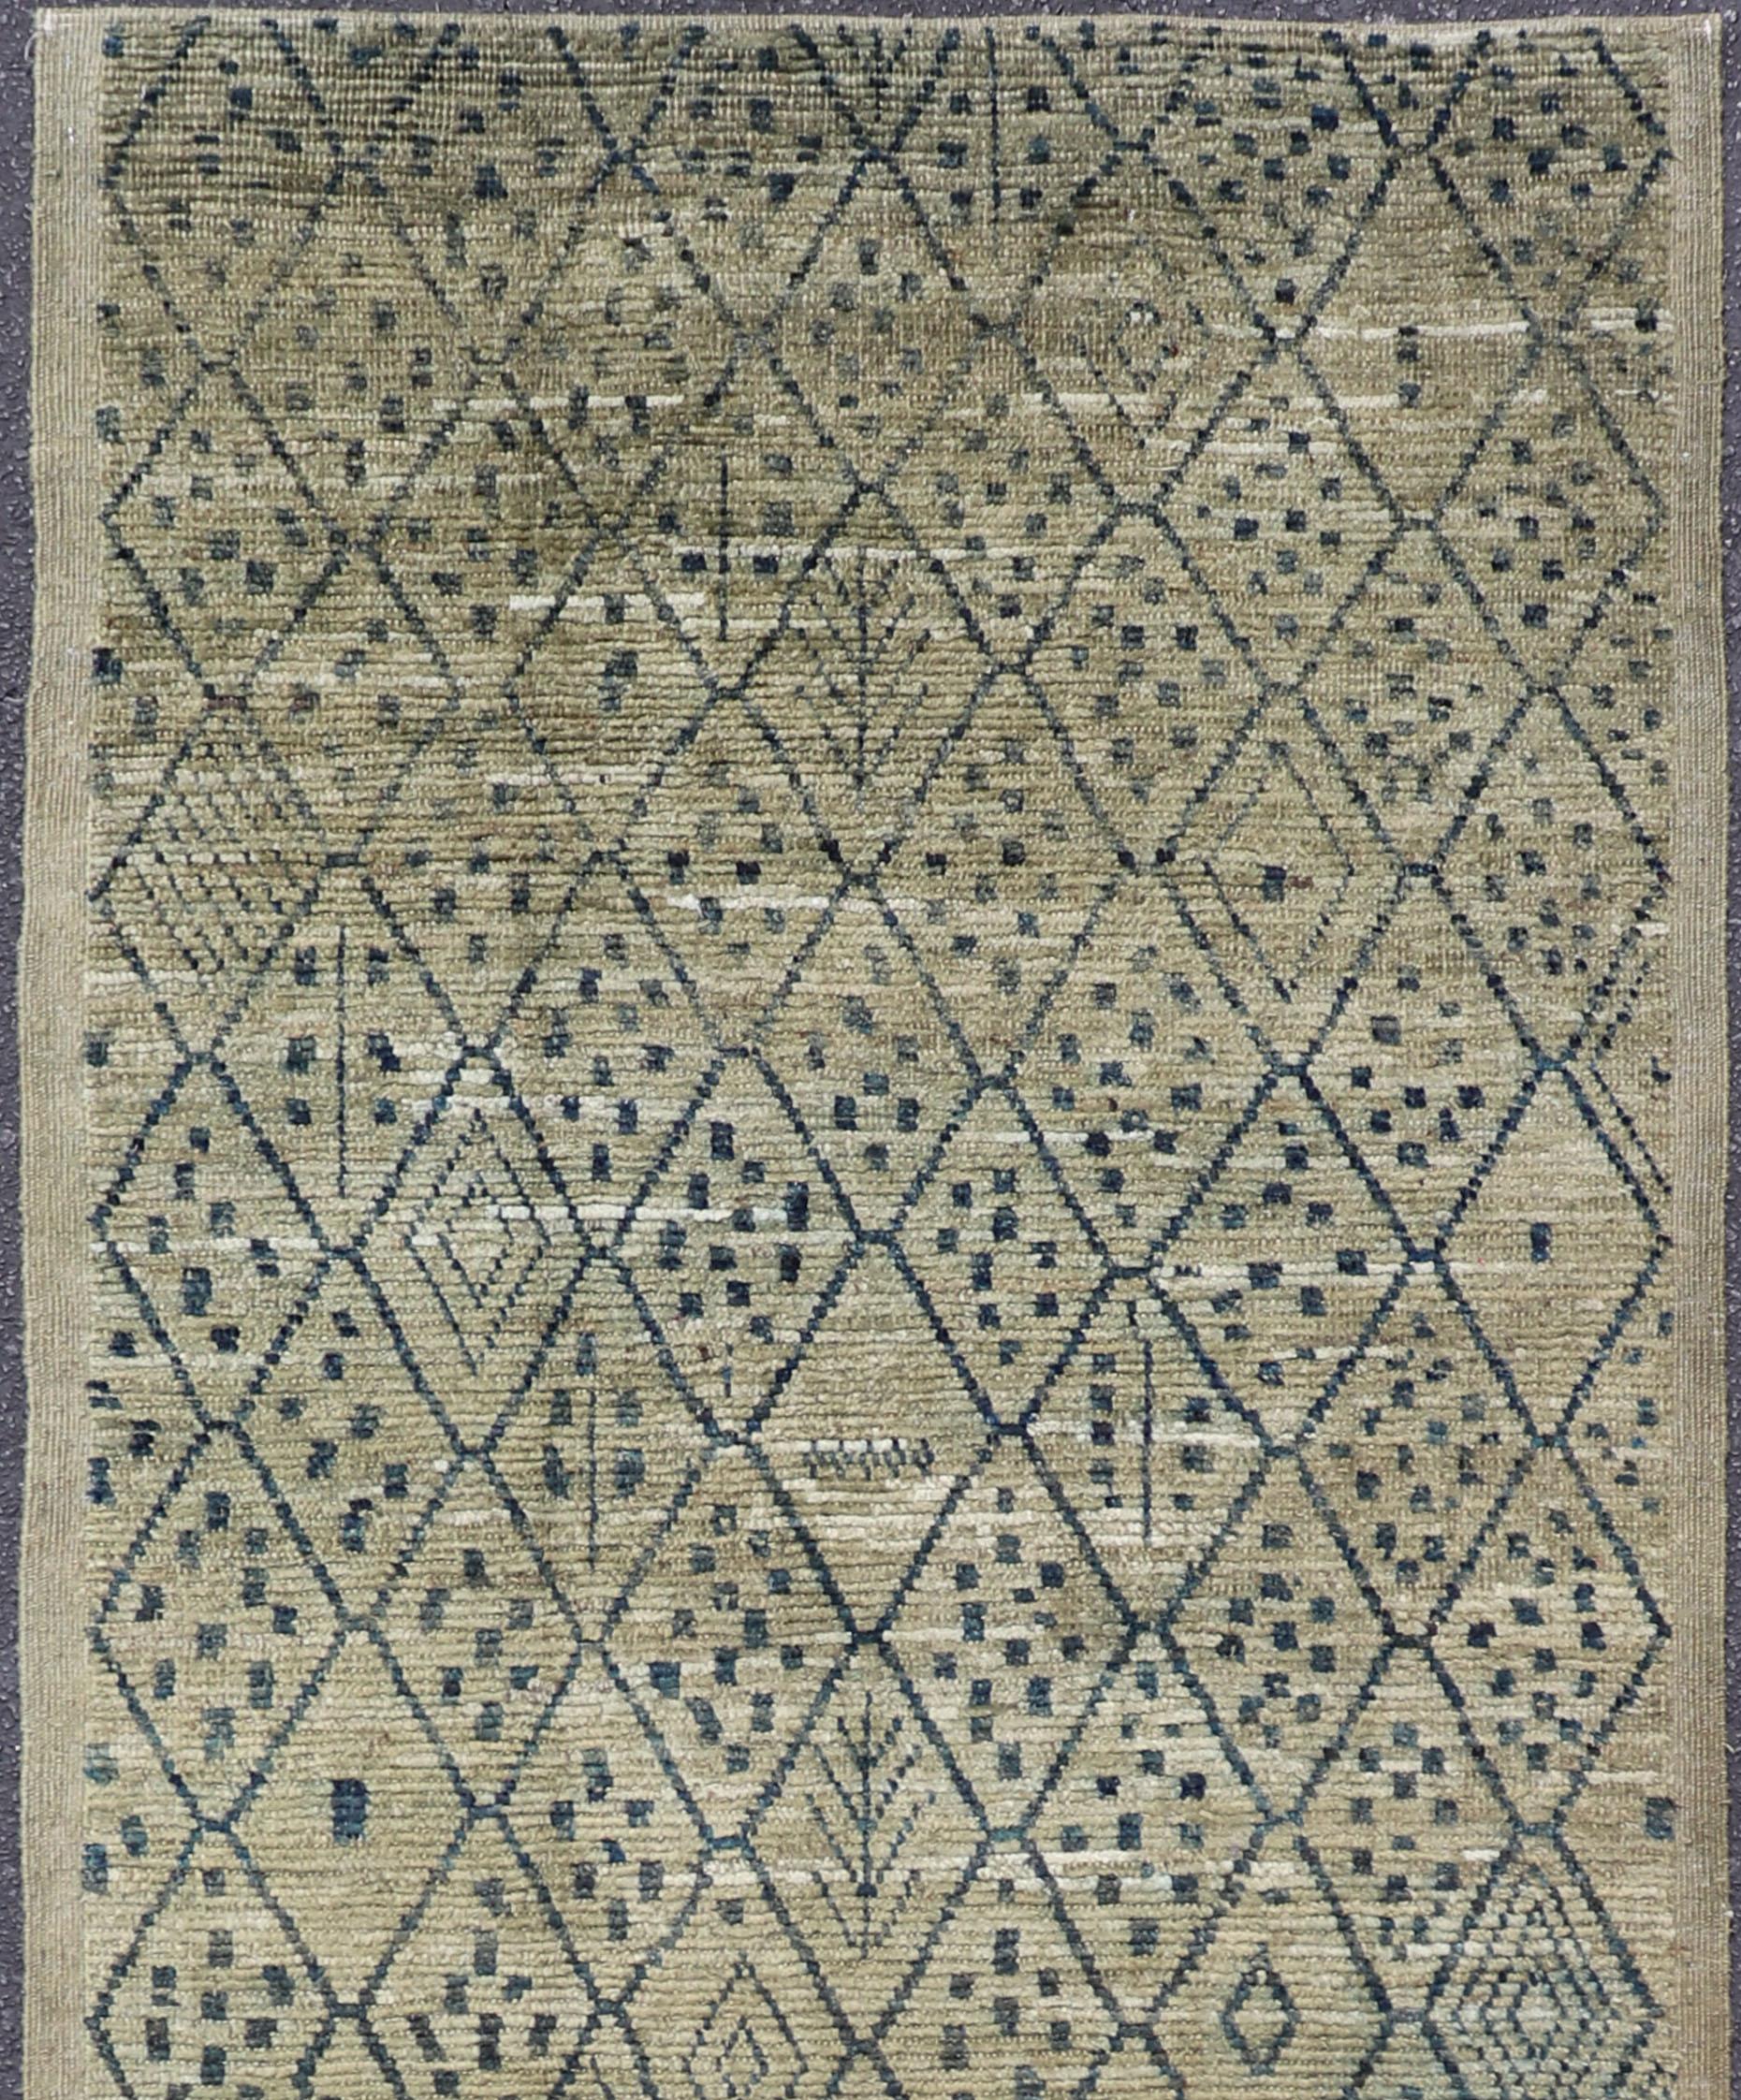 Yellow green background with navy blue highlights in tribal design and free-flowing Moroccan design, rug AFG-31830, country of origin / type: Afghanistan / piled

The geometric design of this rug makes it great option for modern and casual